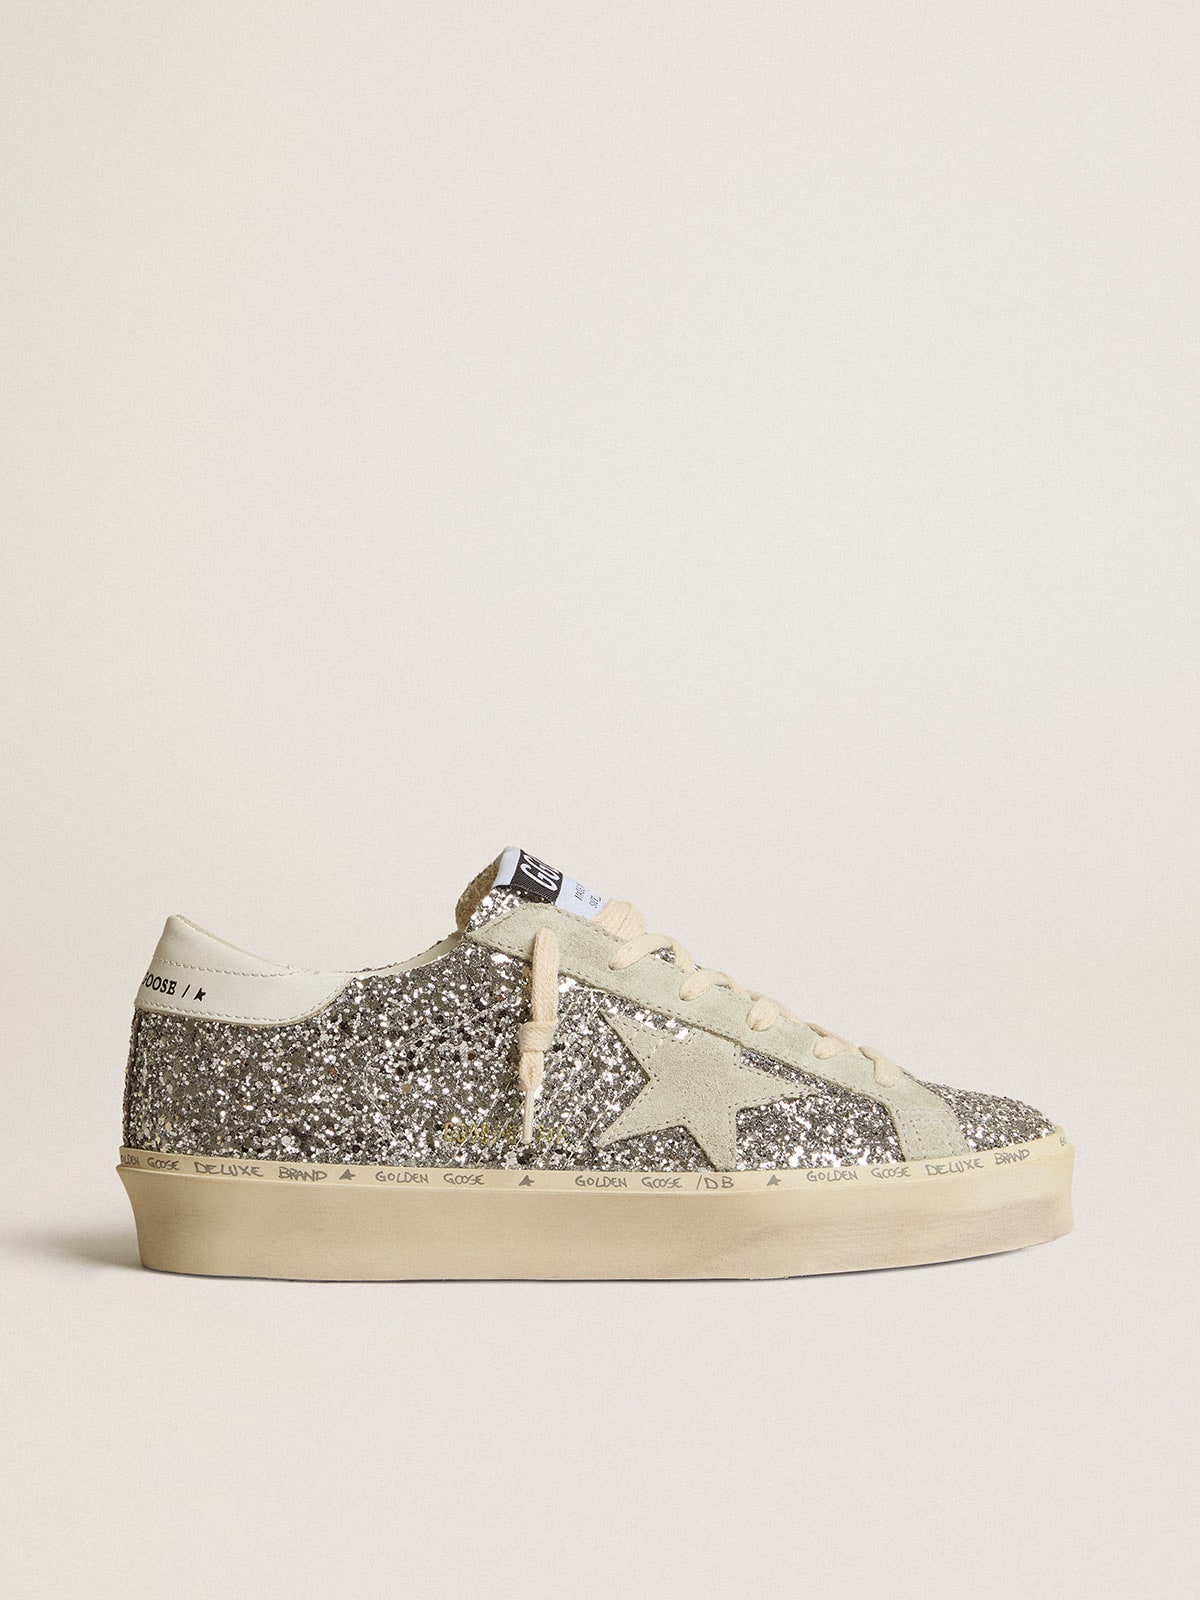 Women's Hi Star in silver glitter with suede star and white heel tab